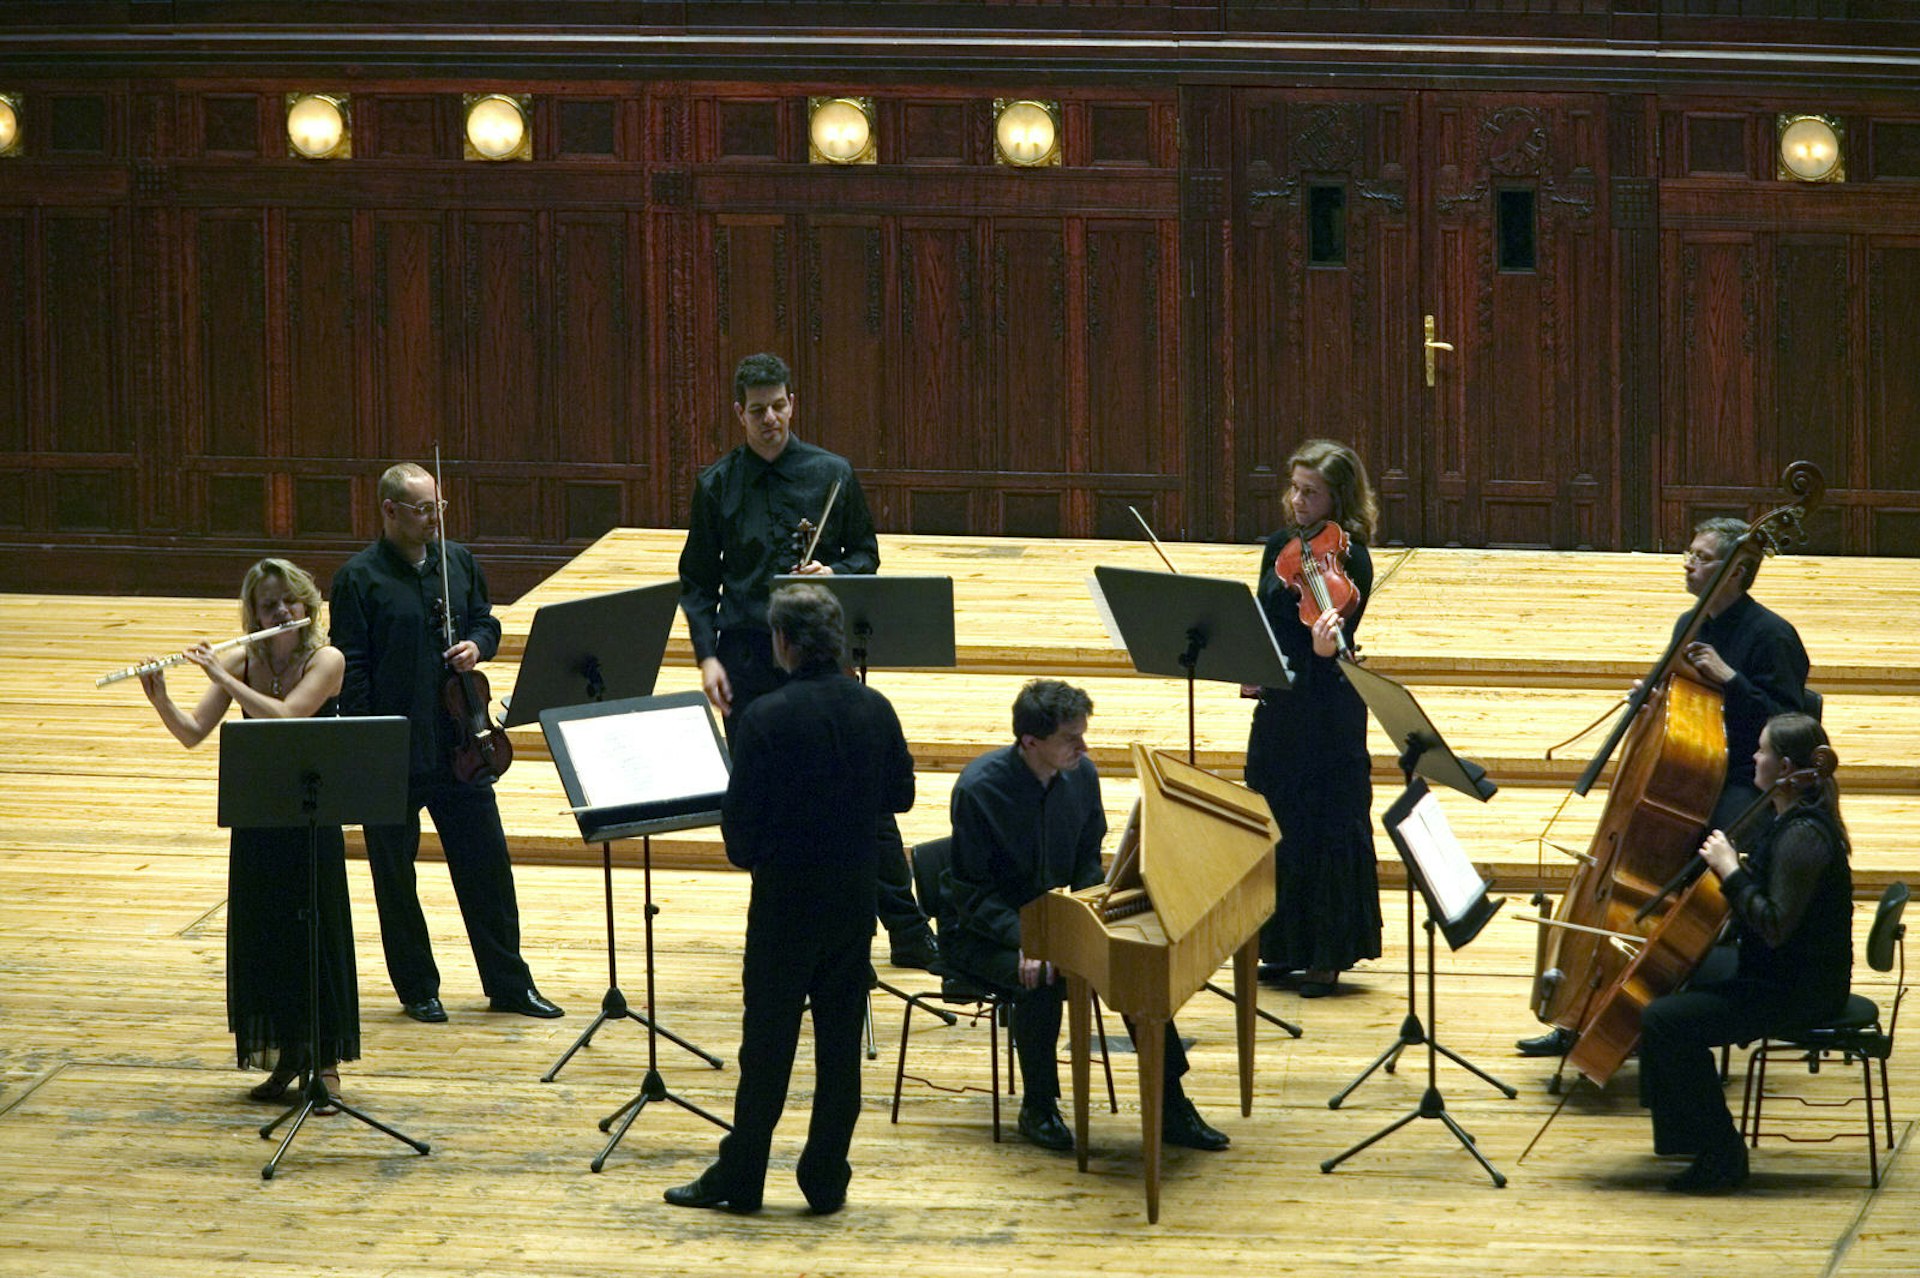 Eight classical musicians, playing flutes, cellos and violins, stand on a wooden stage